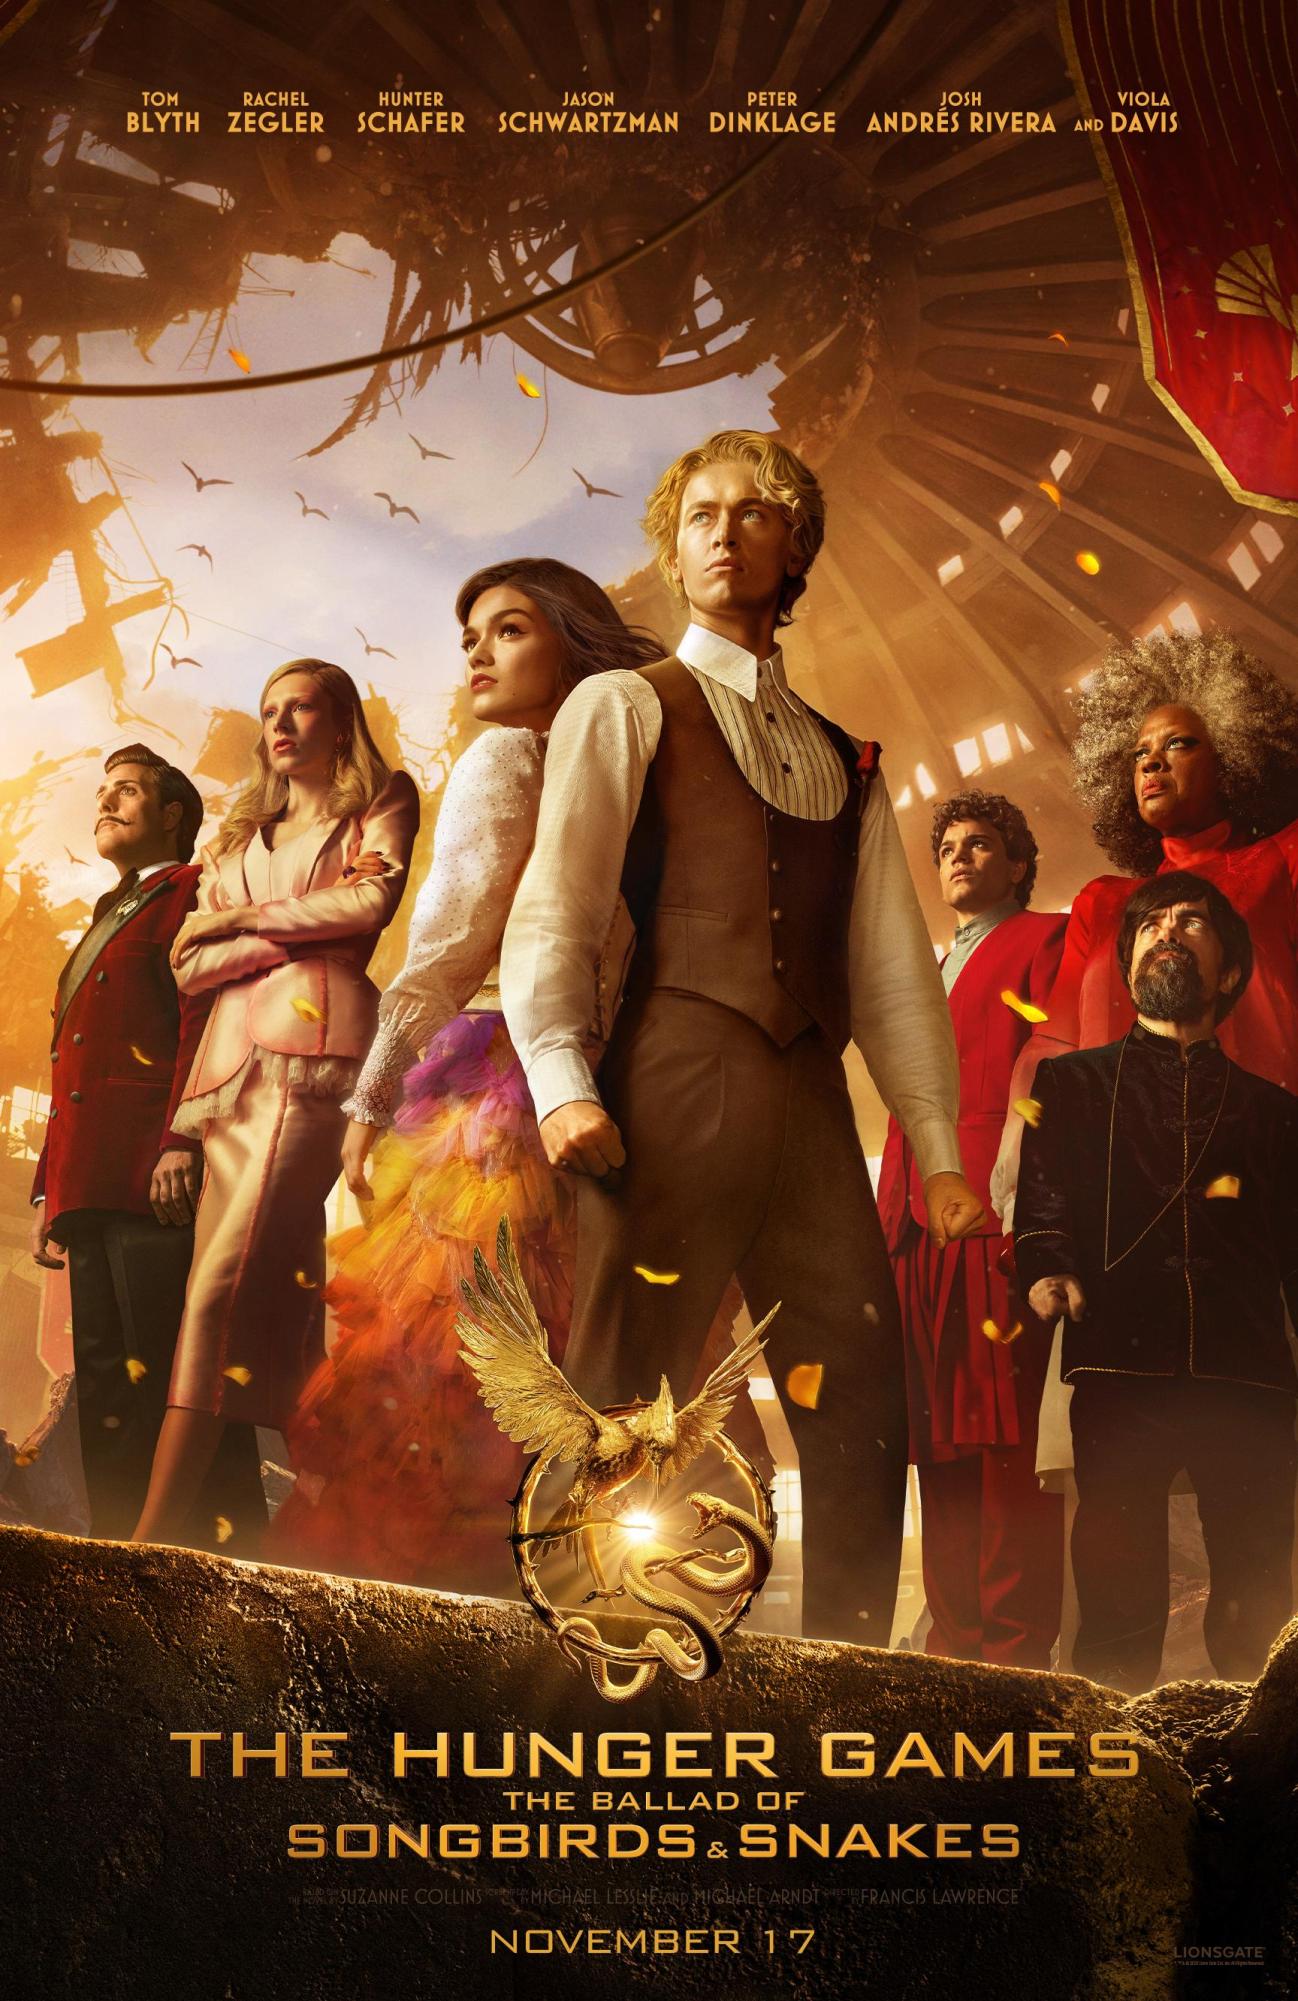 Though “The Ballad of Songbirds and Snakes,” the newest entry in The Hunger Games franchise, has all the hallmarks of a great movie, it fits in more with musicals than action films. 